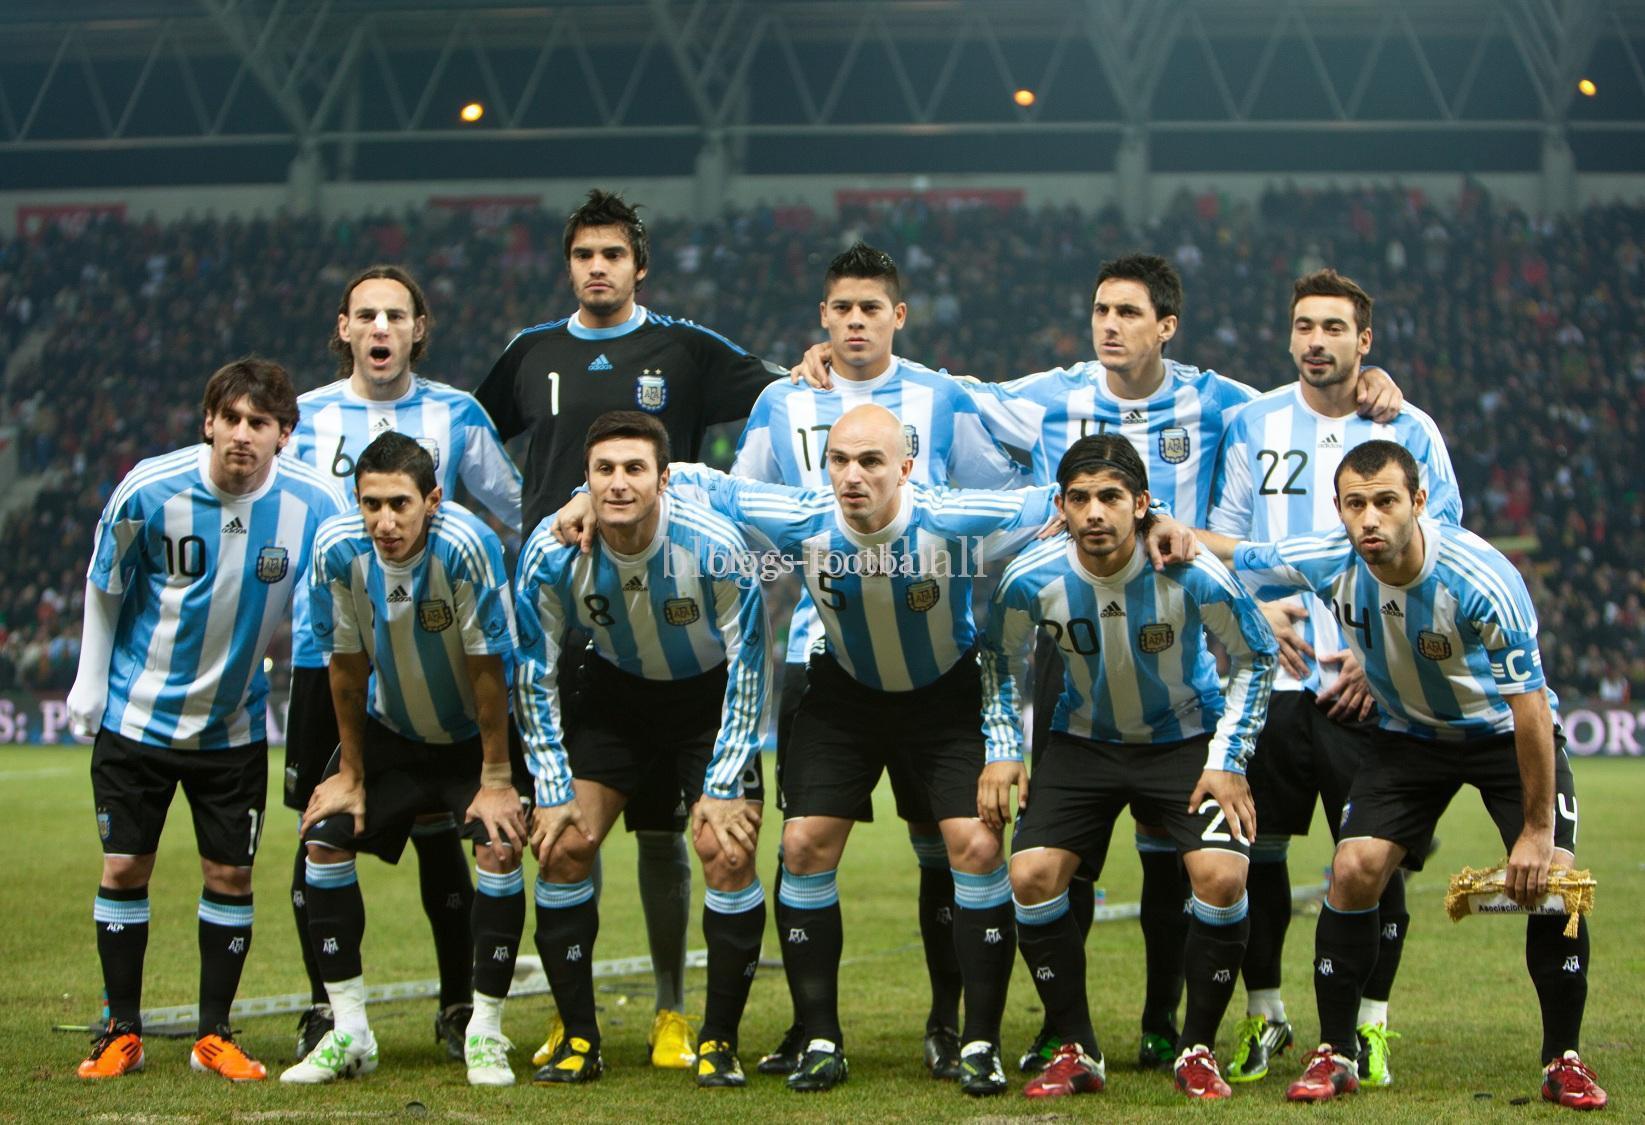 Argentina players in FIFA World Cup 2014 photo for wallpaper